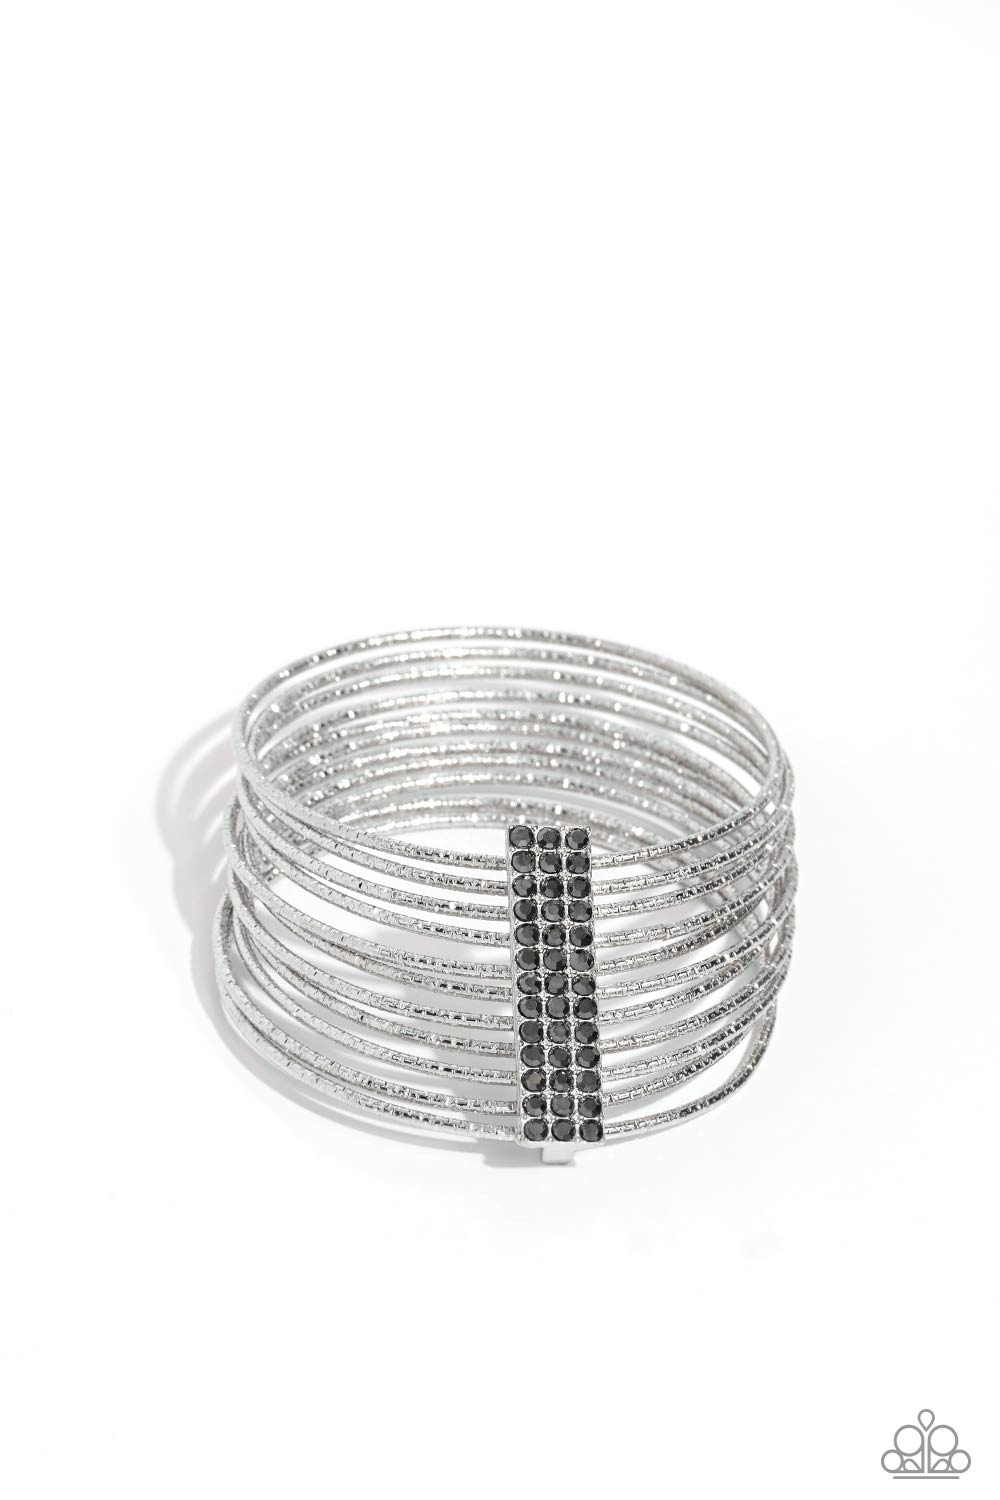 Shimmery Silhouette Silver Bangle Bracelet - Paparazzi Accessories  Held together by an elongated rectangular silver fitting and encrusted in three rows of hematite gems, silver bangles embossed in shimmery diamond-cut textures stack across the wrist for a refined display.  Featured inside The Preview at Made for More! Sold as one individual bracelet.  P9RE-SVXX-323XX